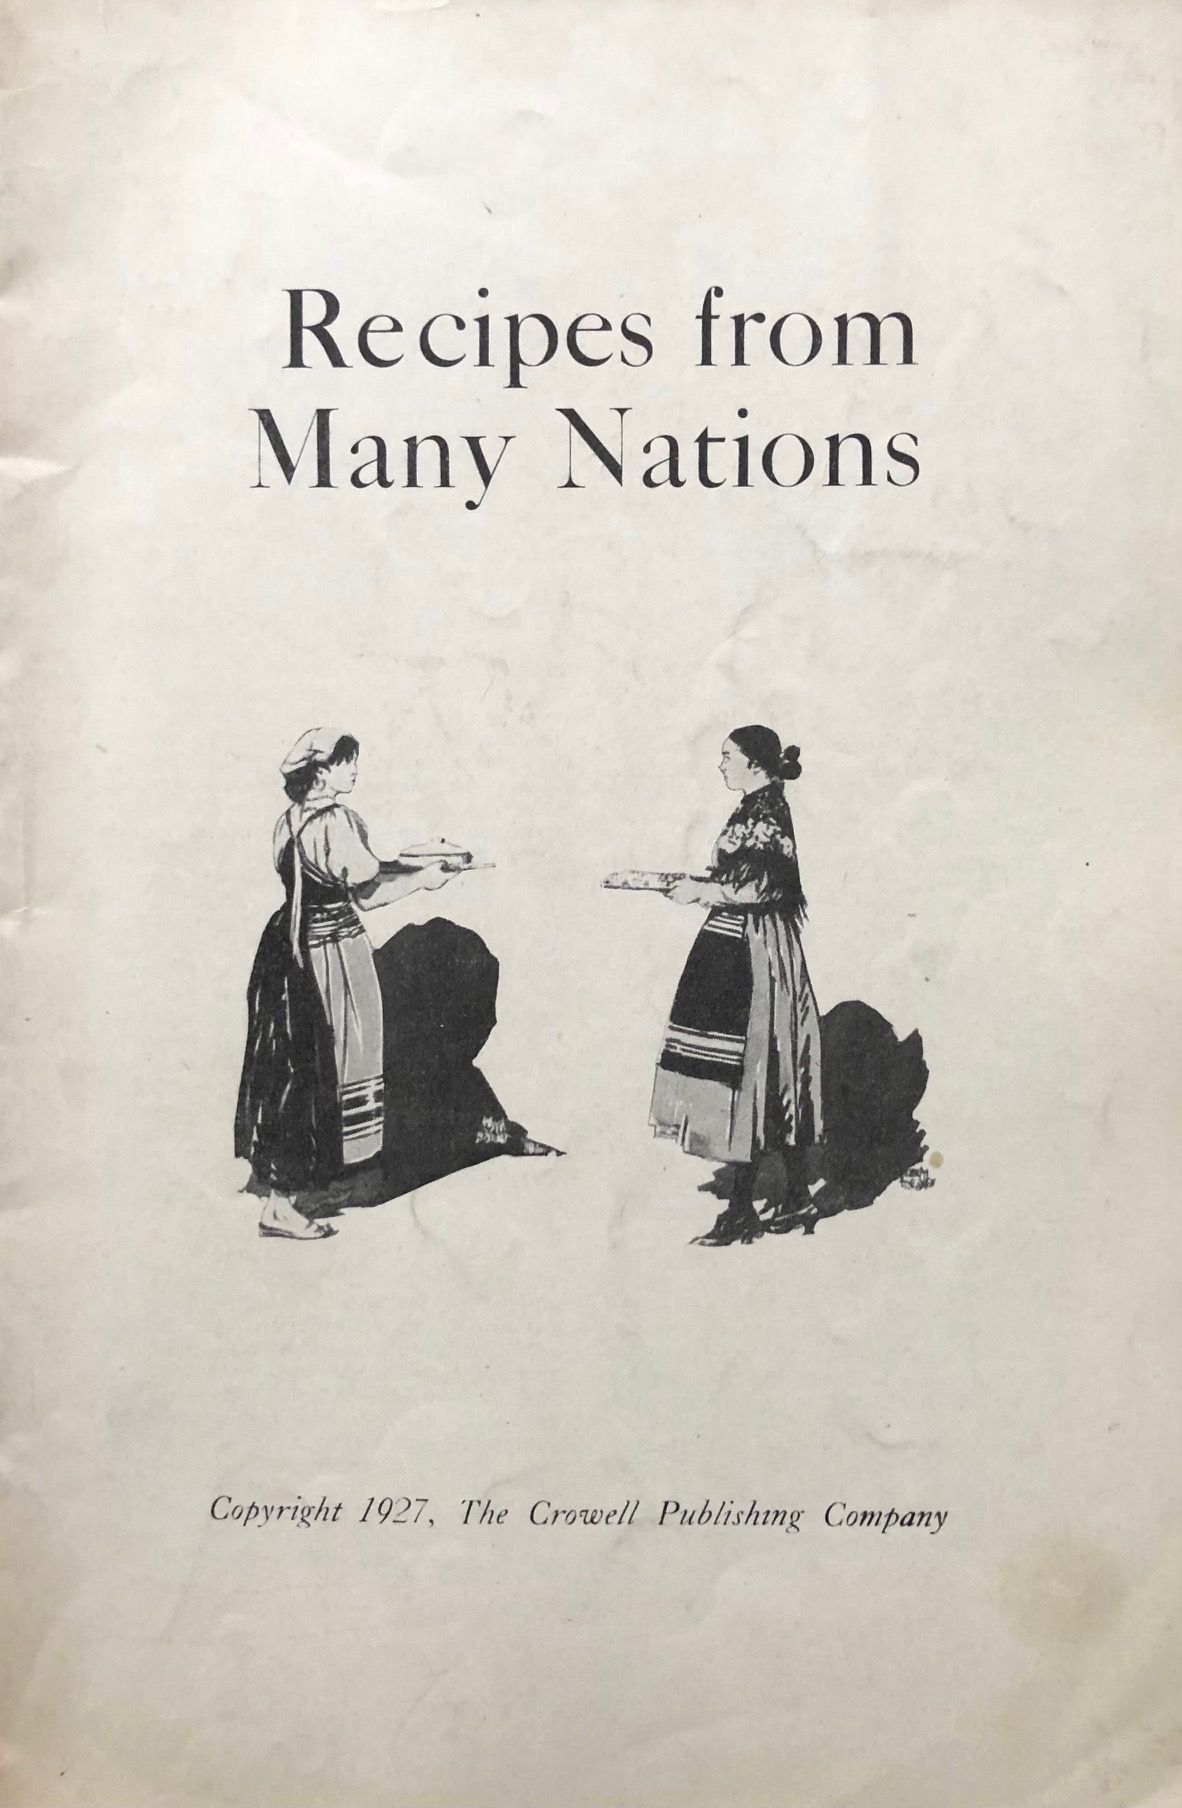 (*NEW ARRIVAL*) (International) Recipes from Many Nations